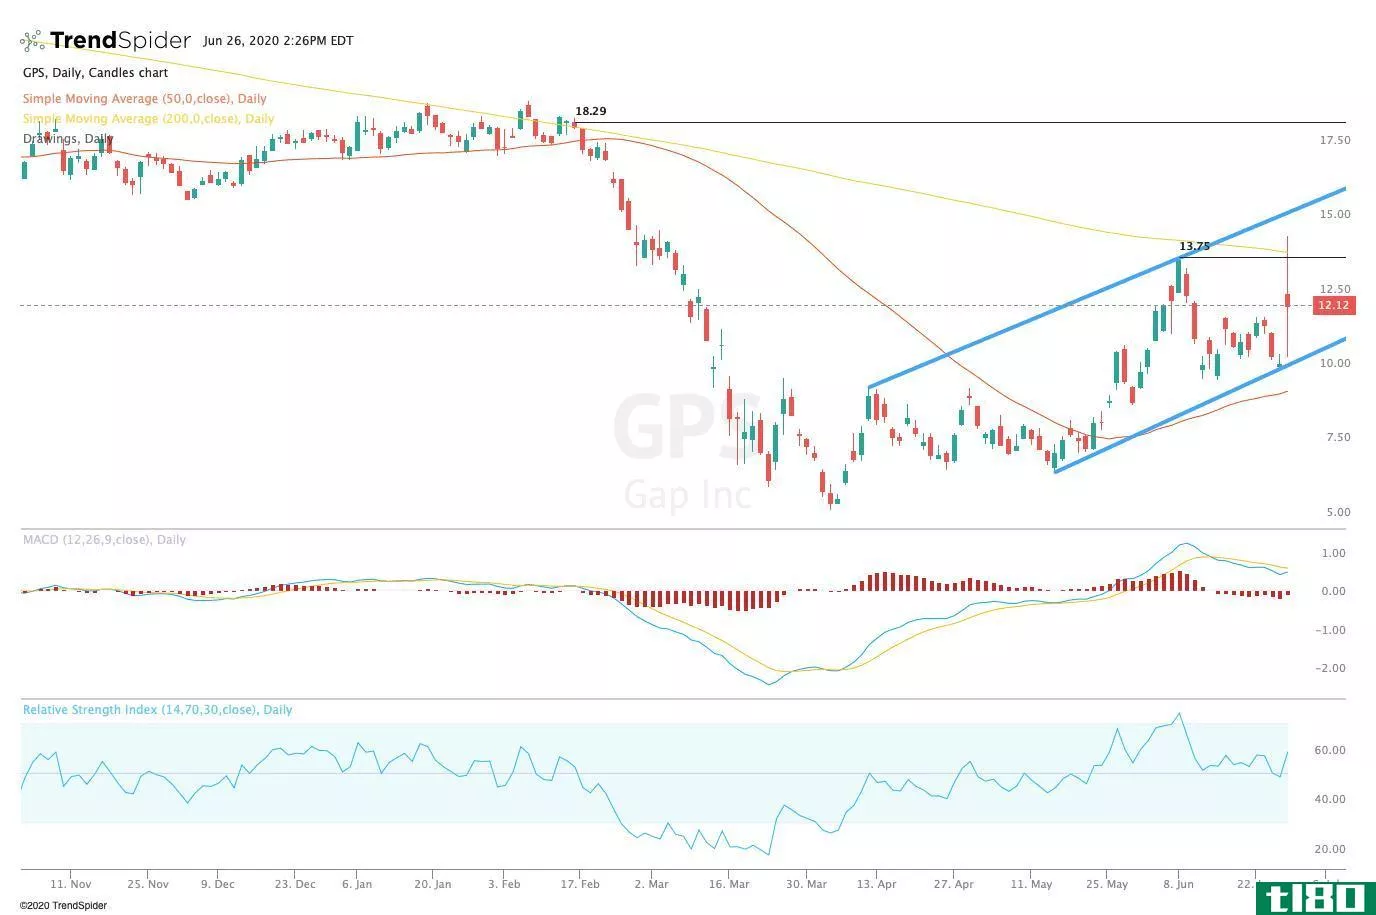 Chart showing the share price performance of The Gap, Inc. (GPS)